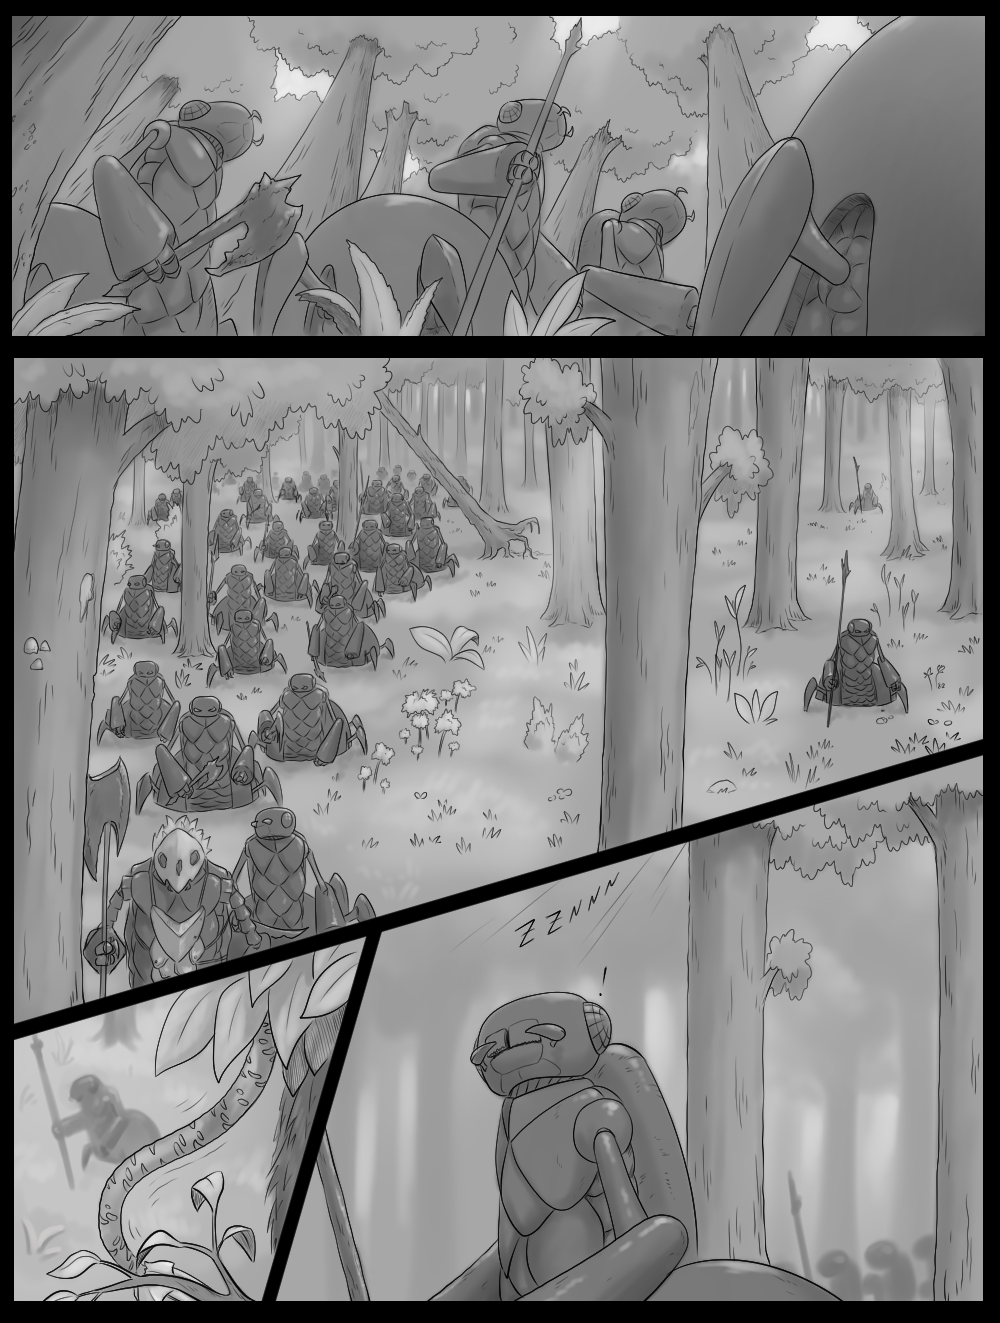 Page 25 - Skrog Army on March (Part 3)